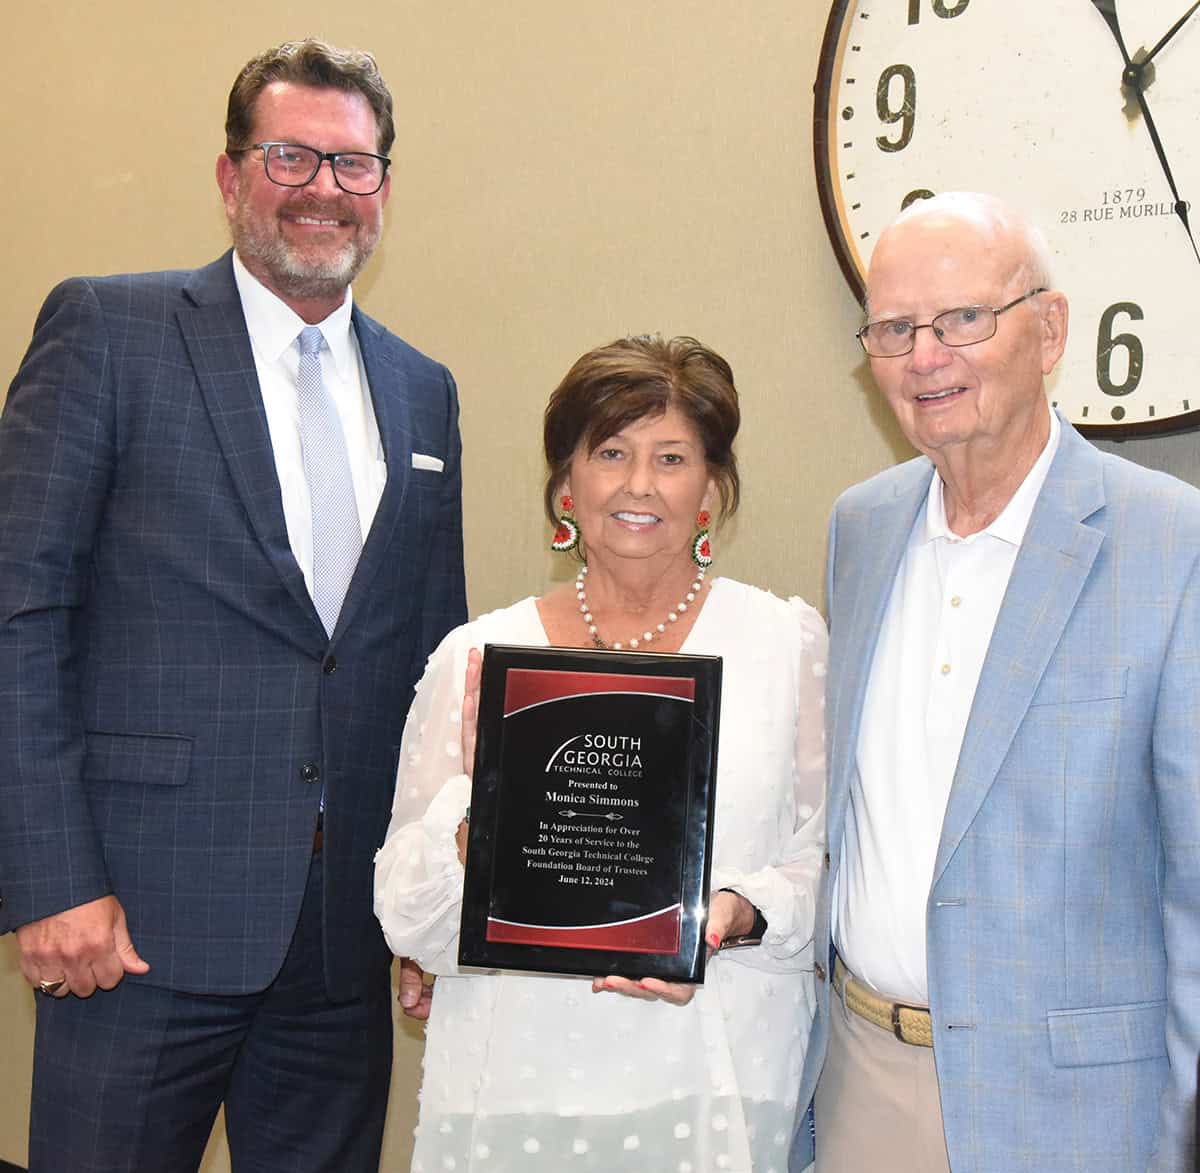 SGTC President Dr. John Watford (l) is shown above with SGTC Foundation Trustee Monica Simmons (c) and SGTC Foundation Chairman Bill Harris (r). Simmons is rotating off the SGTC Foundation Board of Trustees after over 20 years of service.